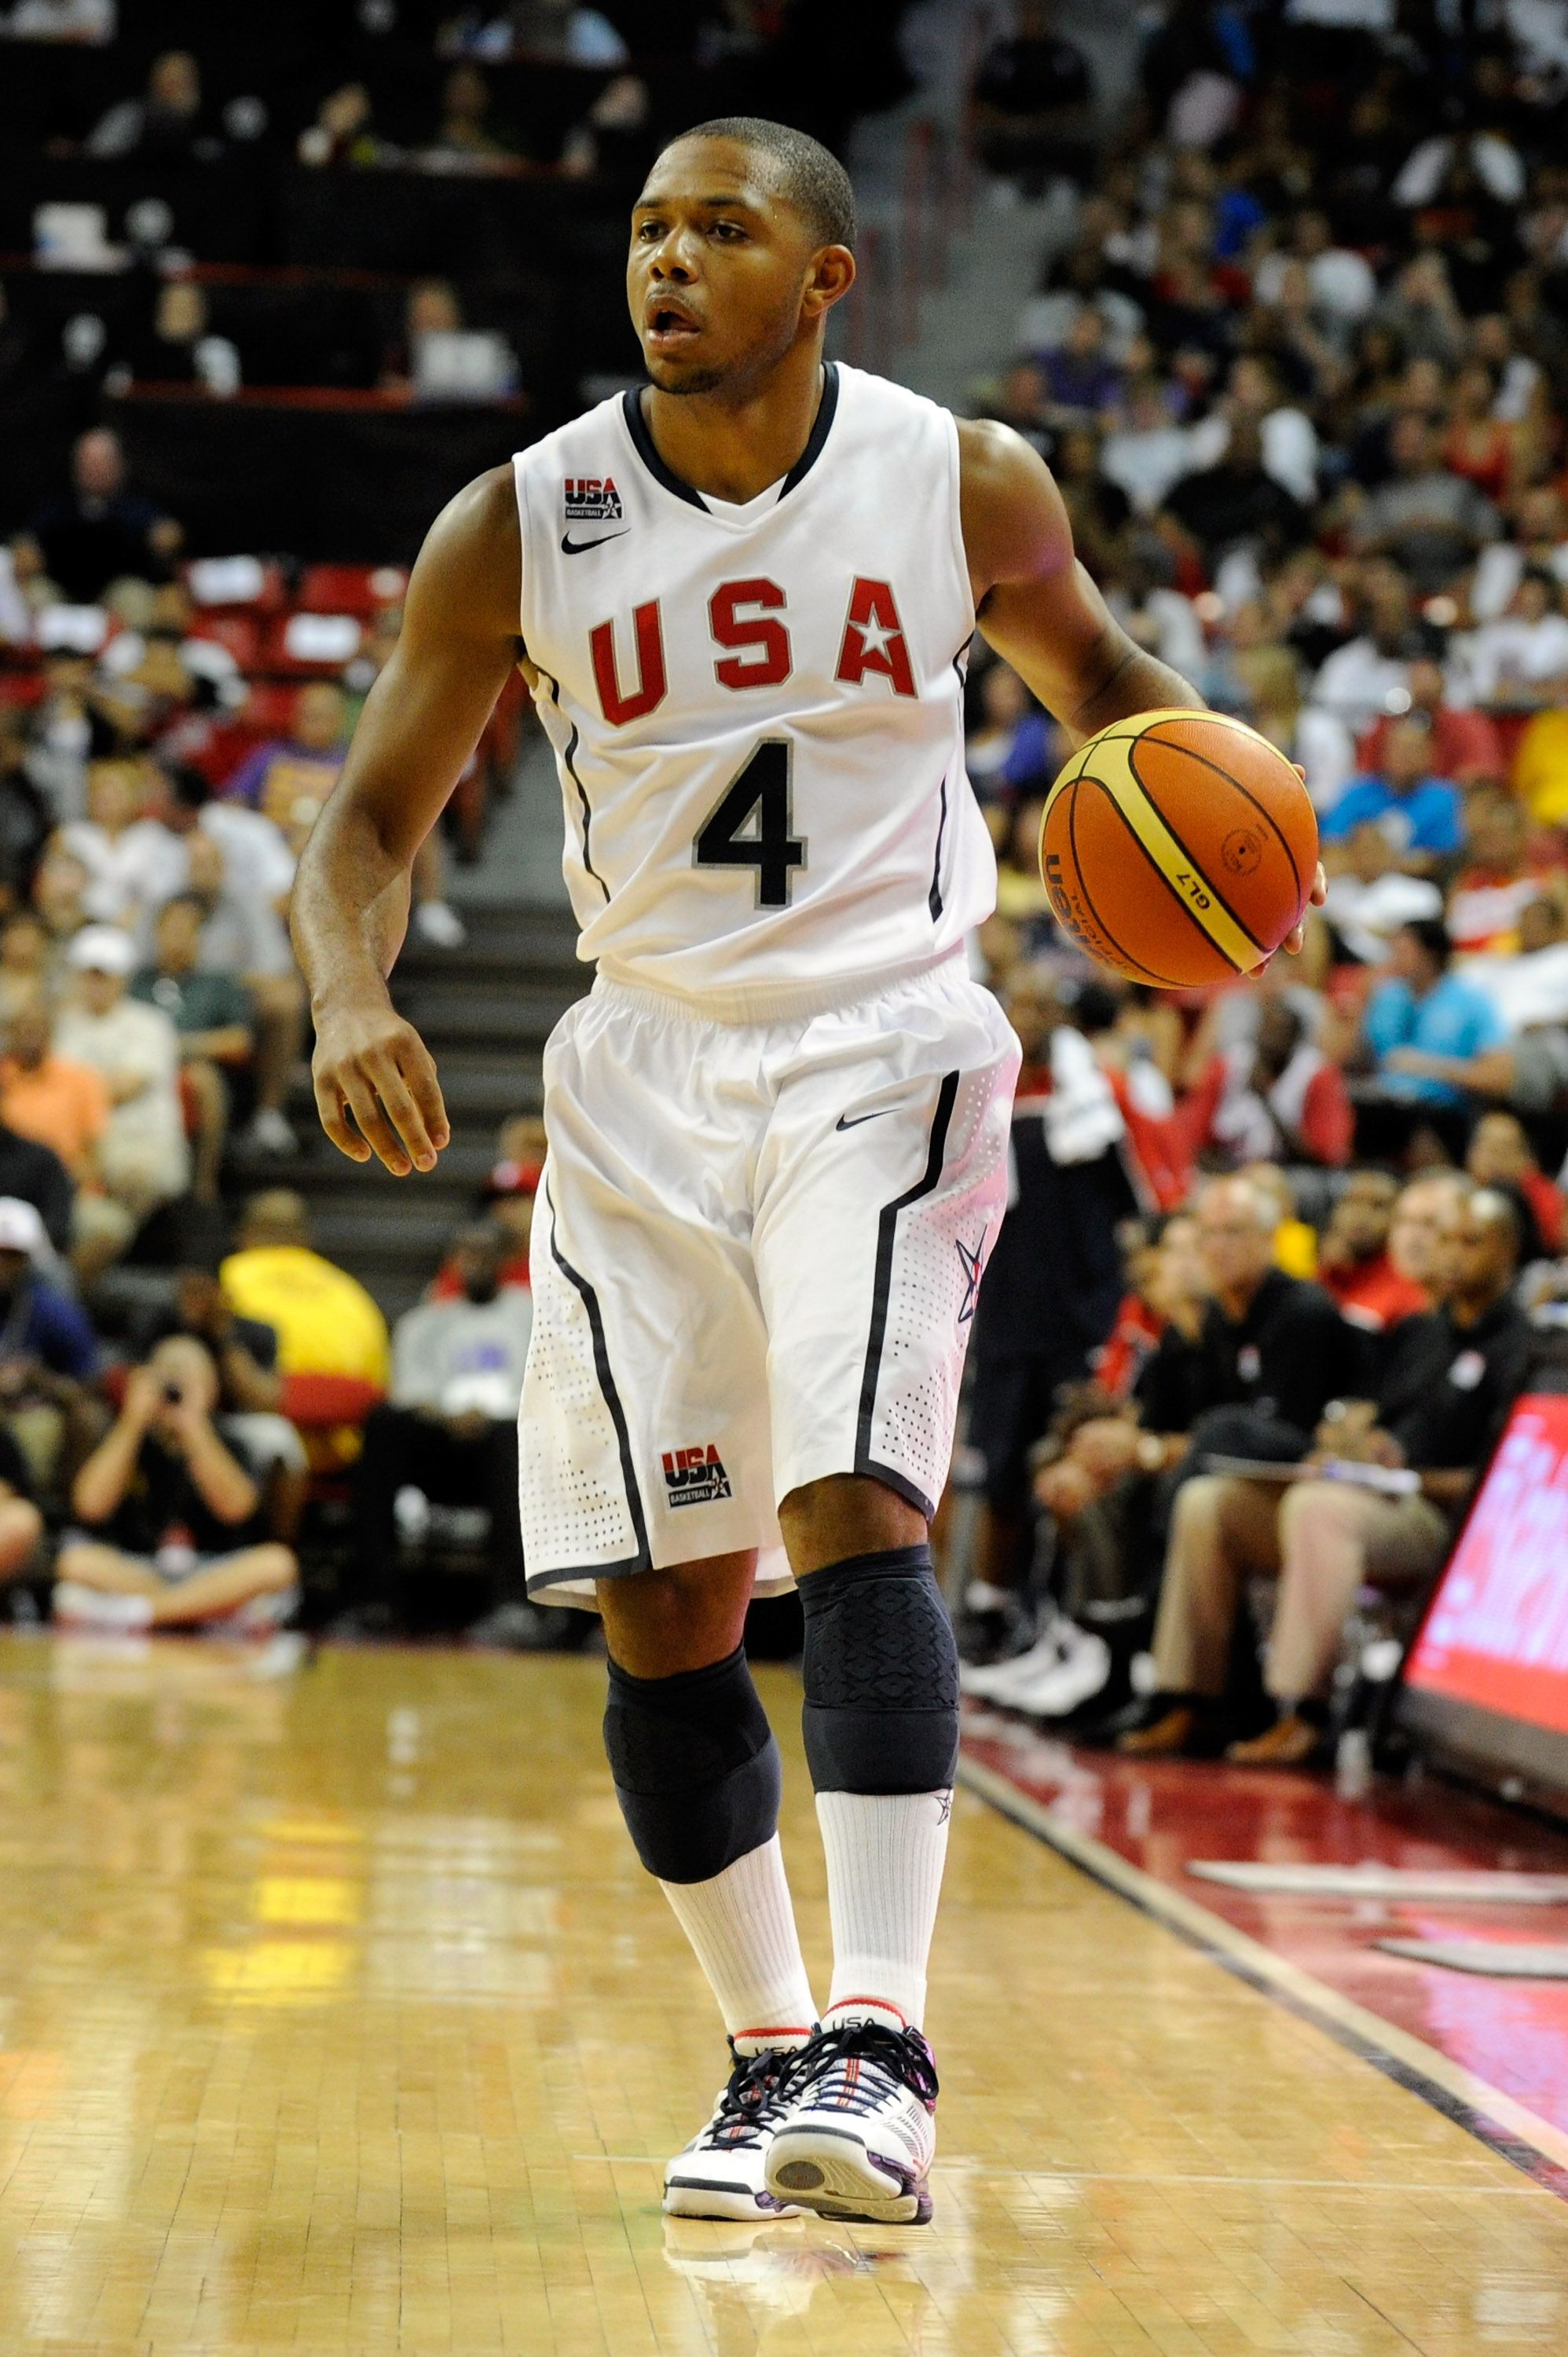 Why Kevin Durant And Team Usa Have Been Successful In The 10 Fiba Championship Bleacher Report Latest News Videos And Highlights